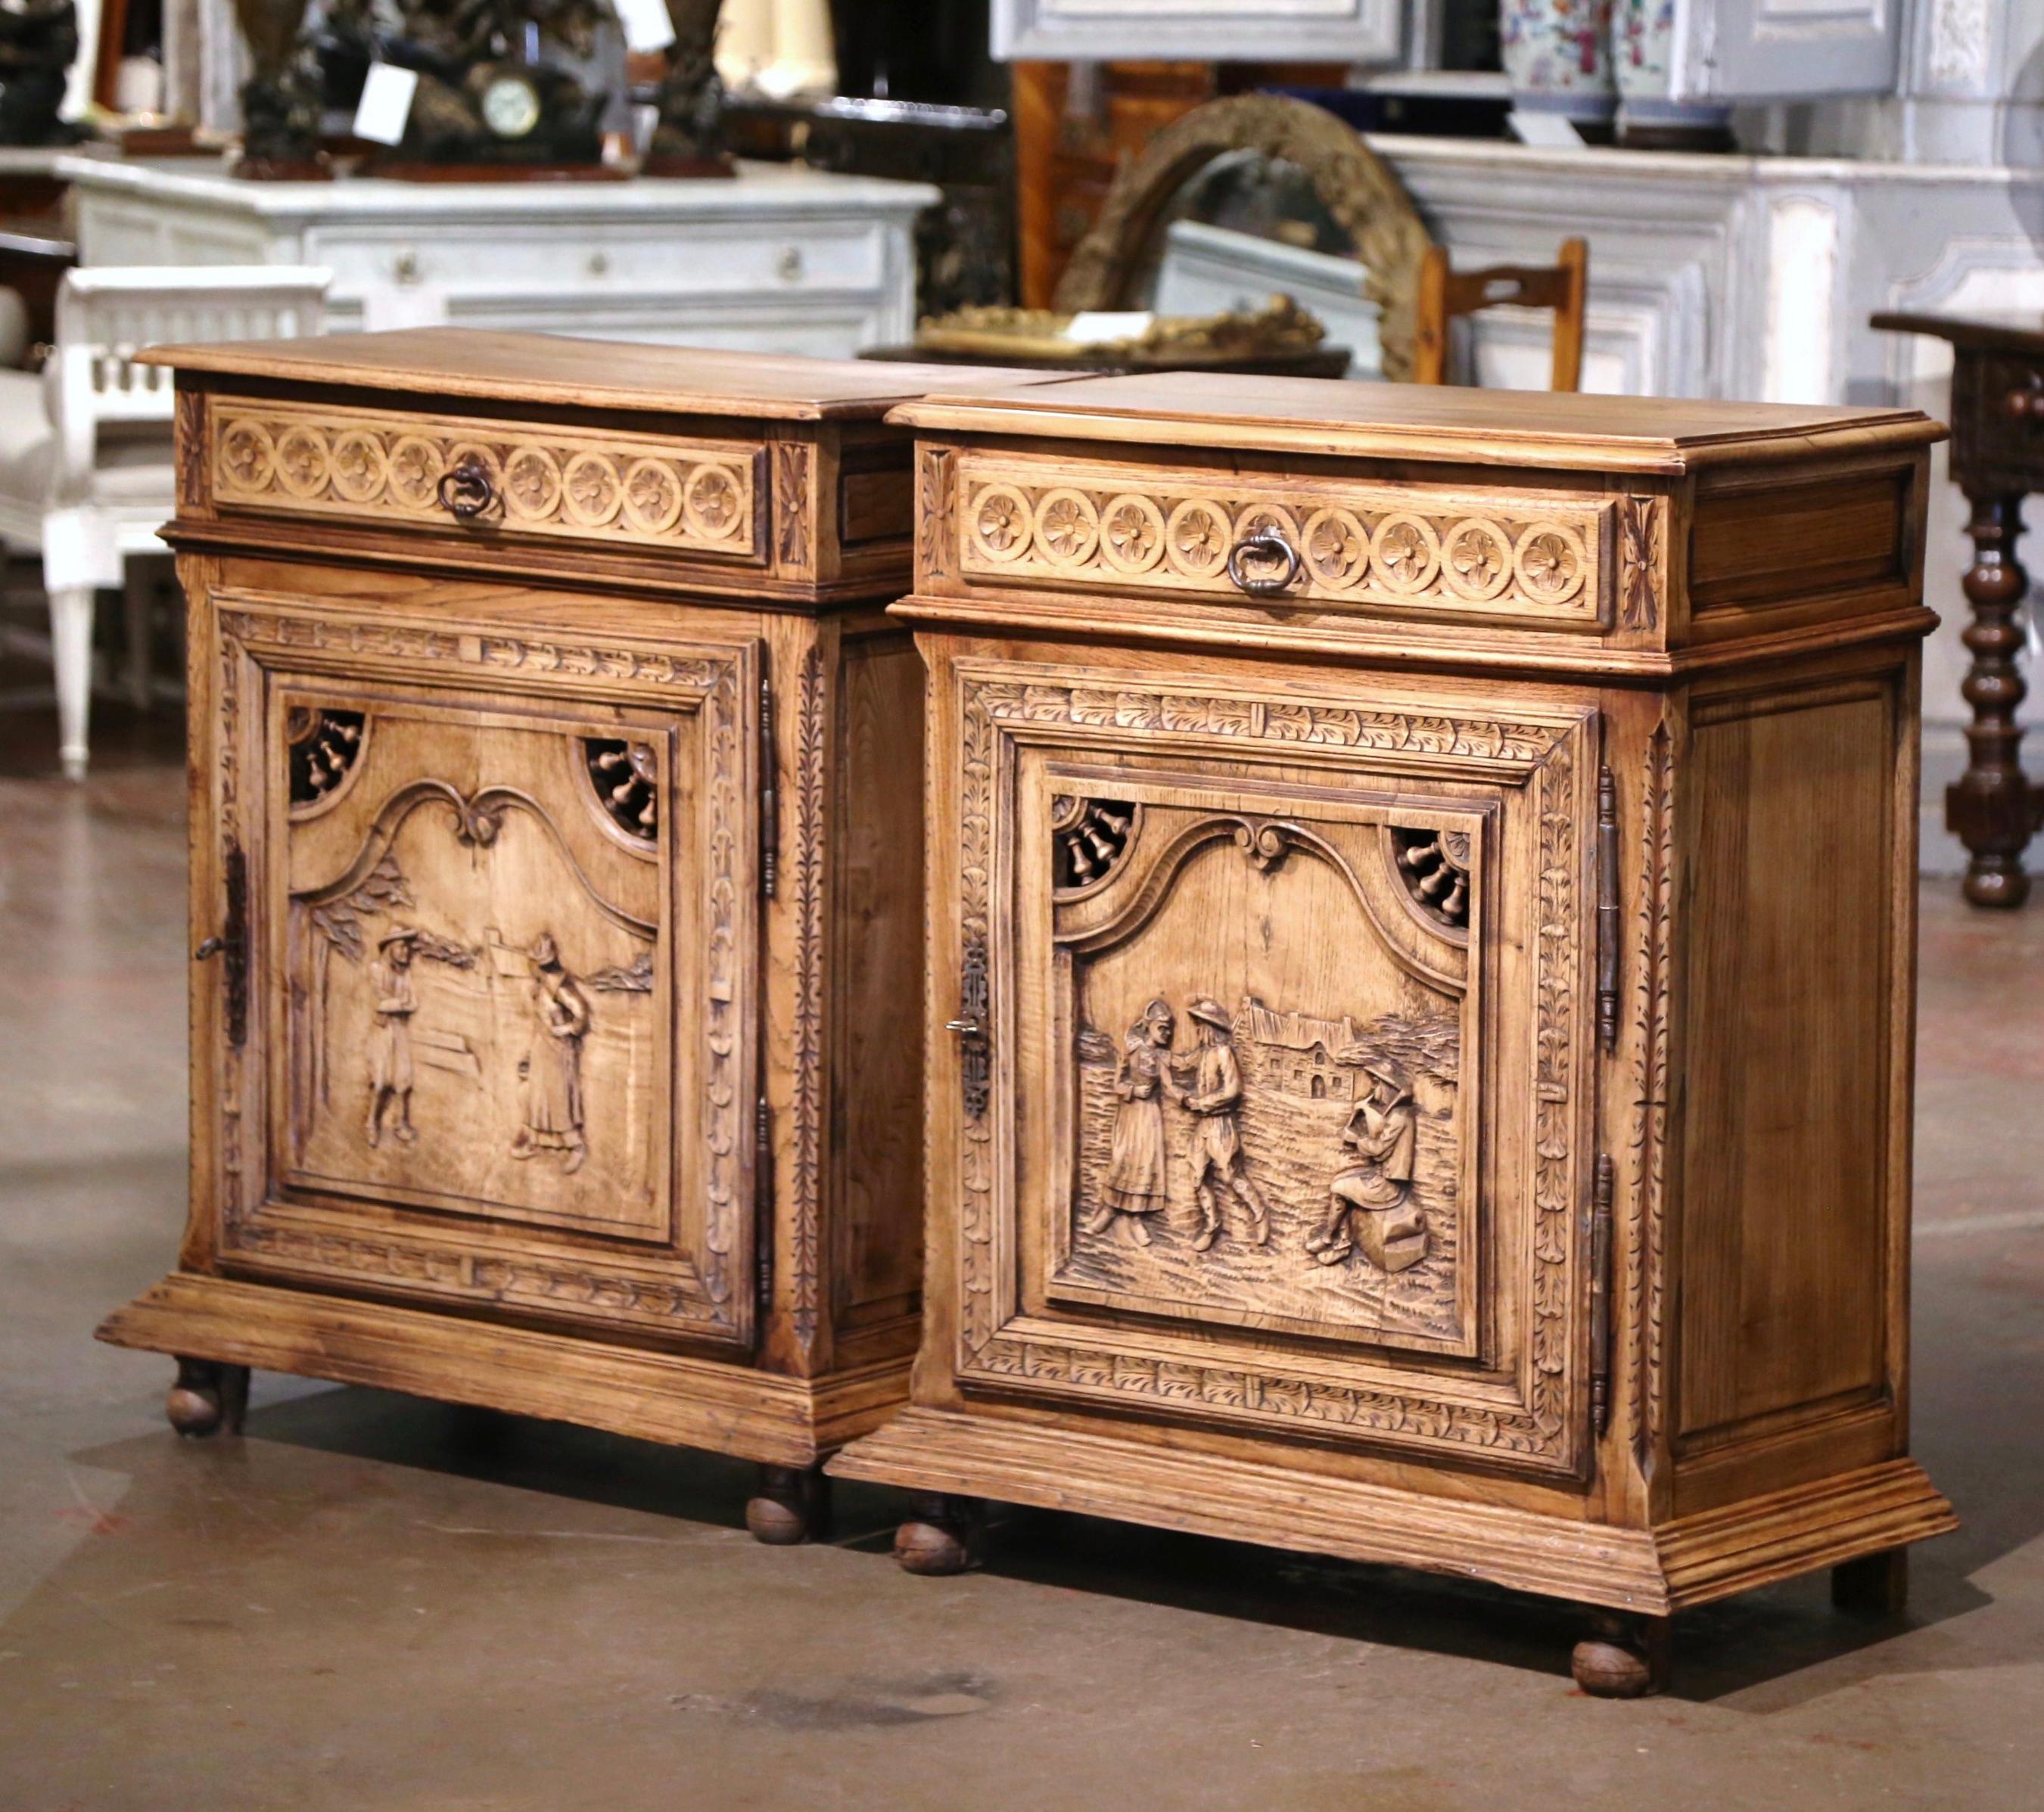  19th Century French Carved Bleached Oak Cabinets from Brittany, Set of Two For Sale 2